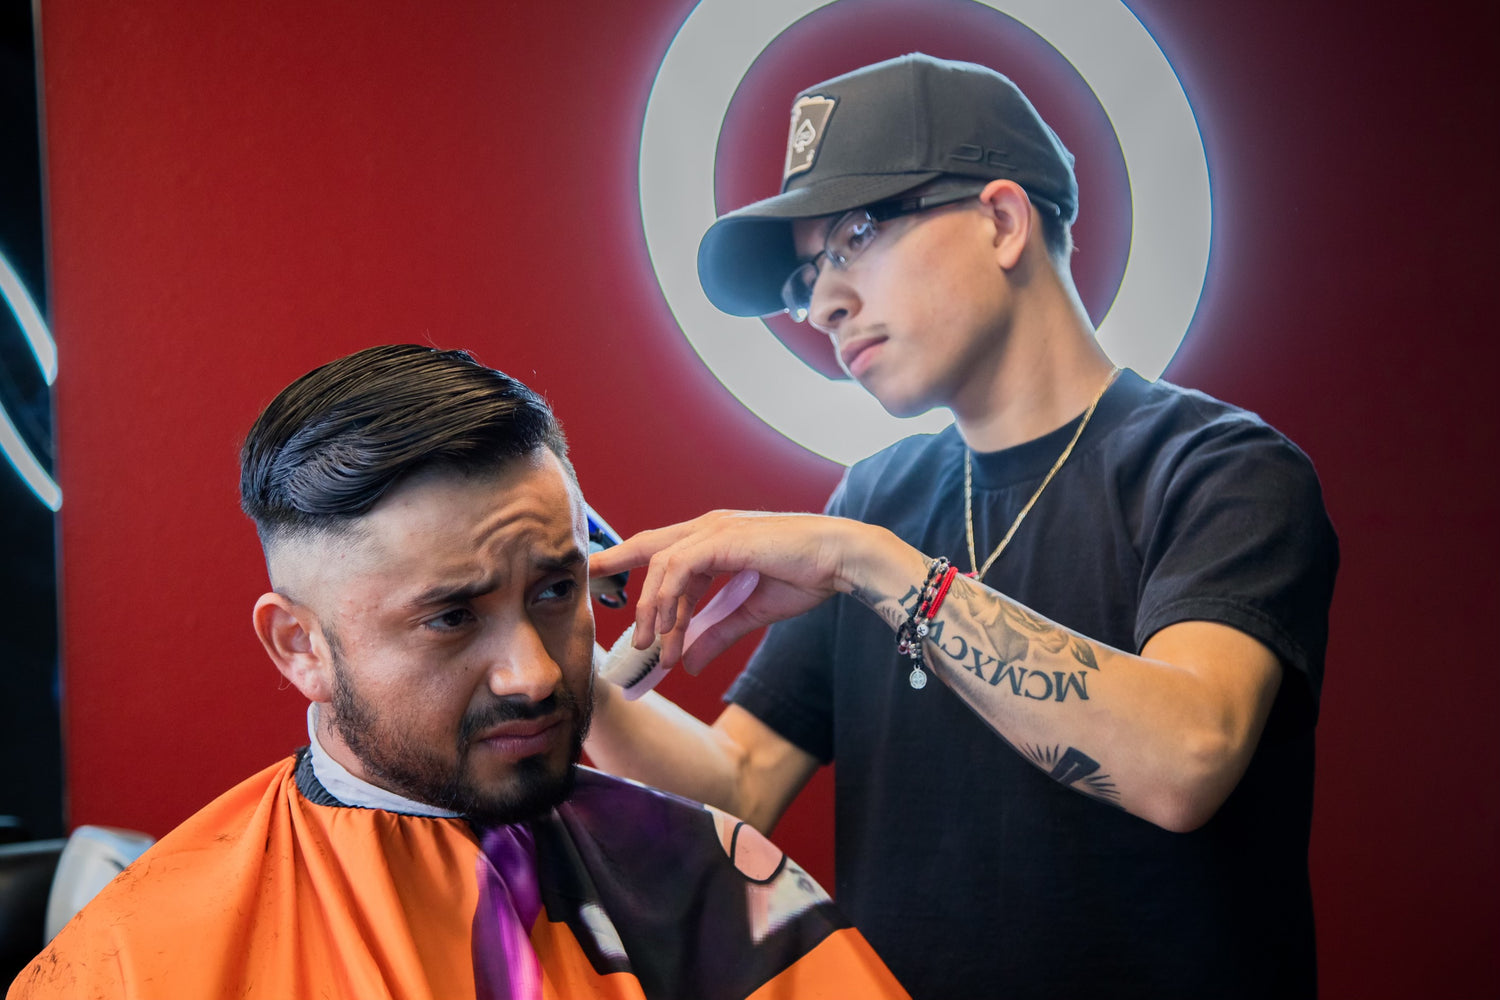 Barber with a black shirt and hat giving a client with an orange apron a haircut 